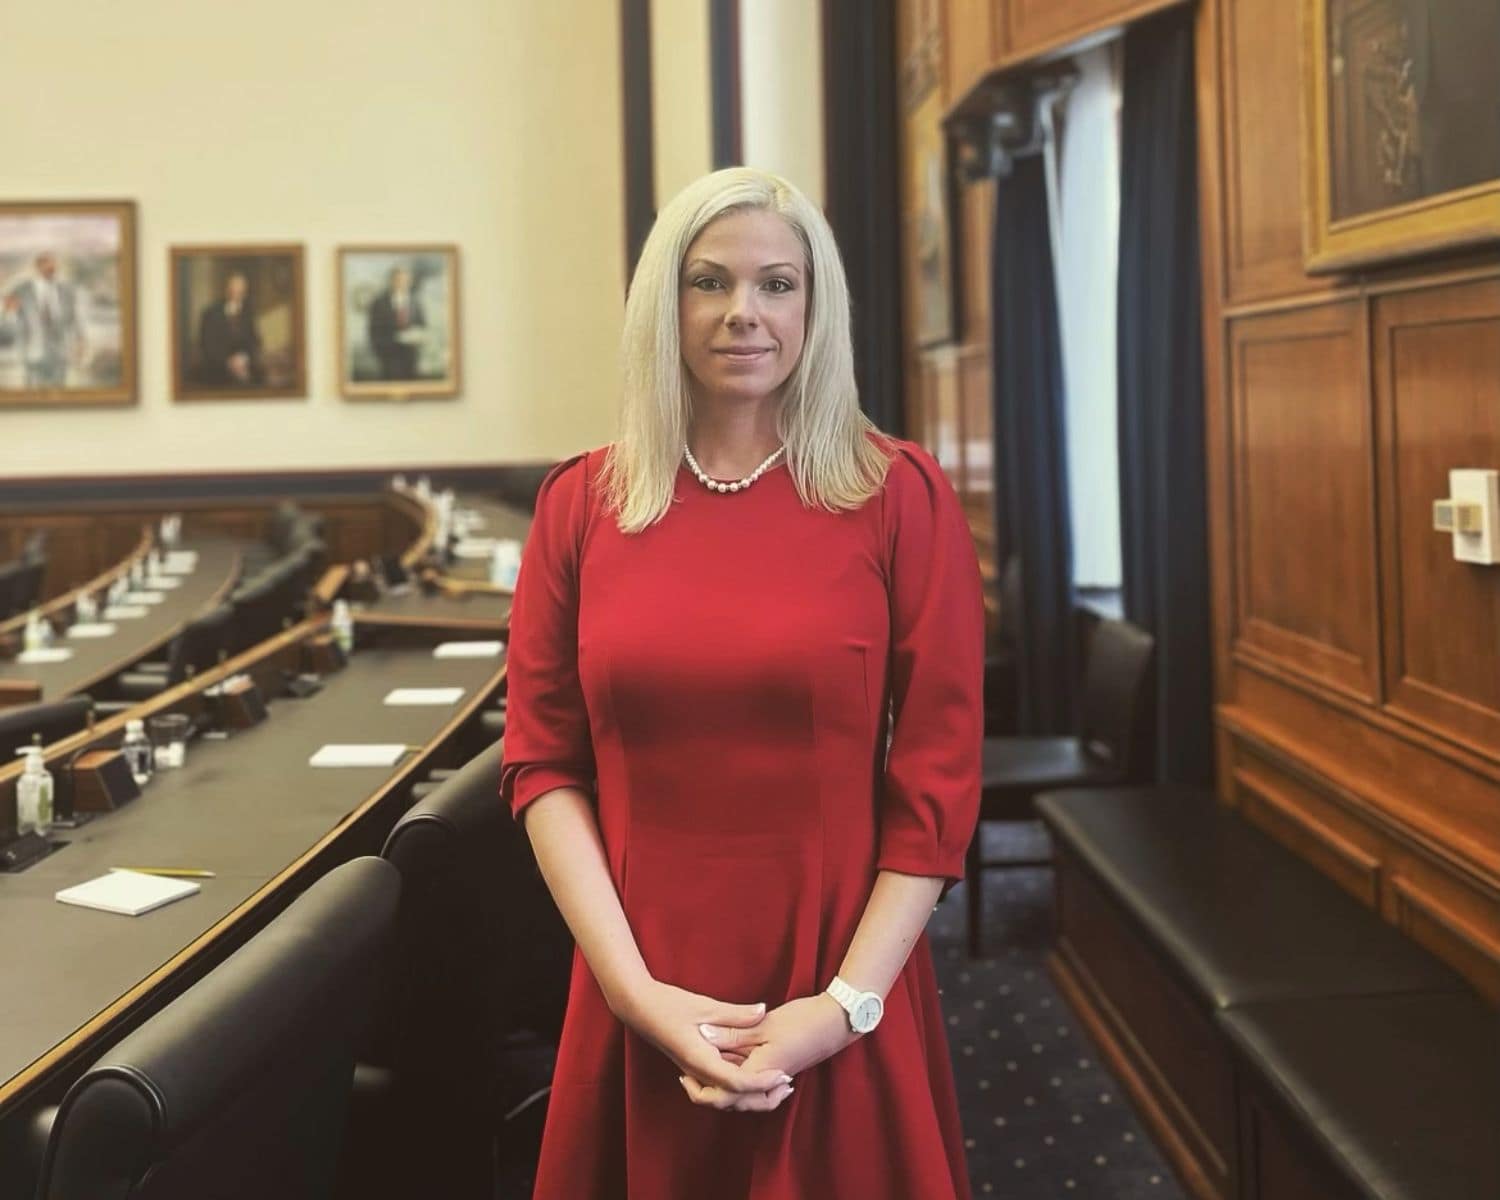 Worldwide student April Bedunah inside the U.S. House of Representatives where she is interning with the Subcommittee on Aviation. (Photo: April Bedunah)